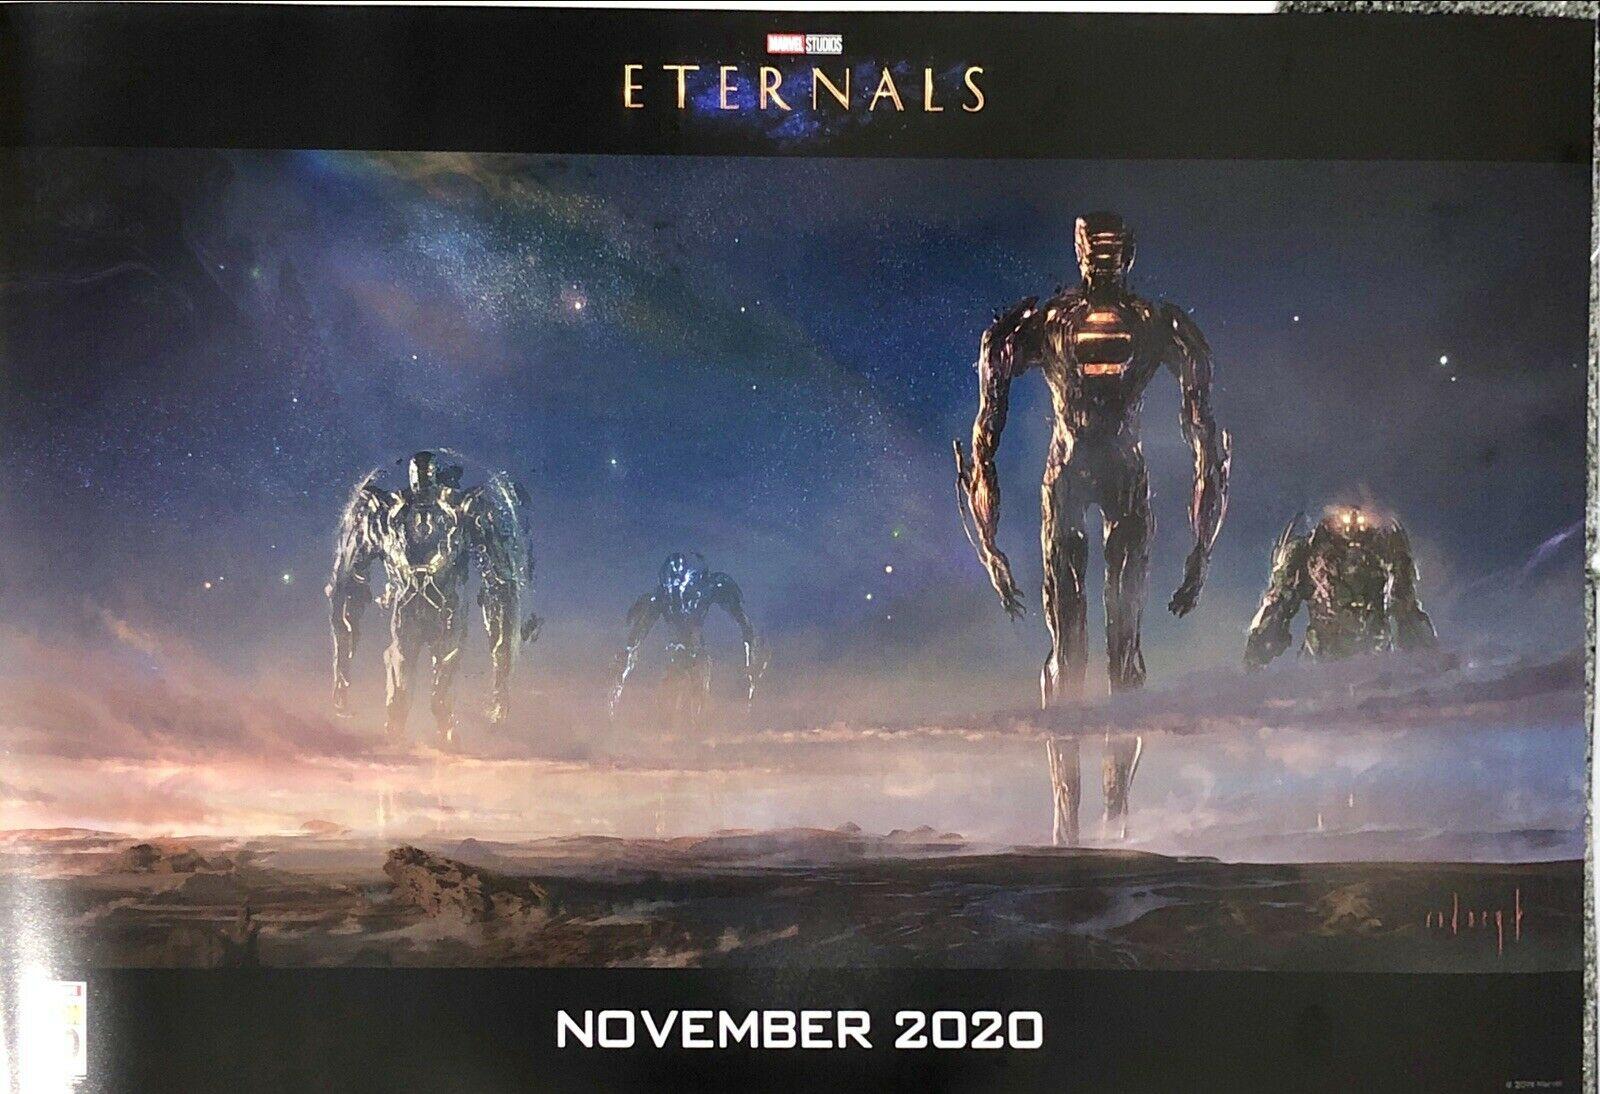 THE ETERNALS San Diego Comic Con Poster Features A First Look At